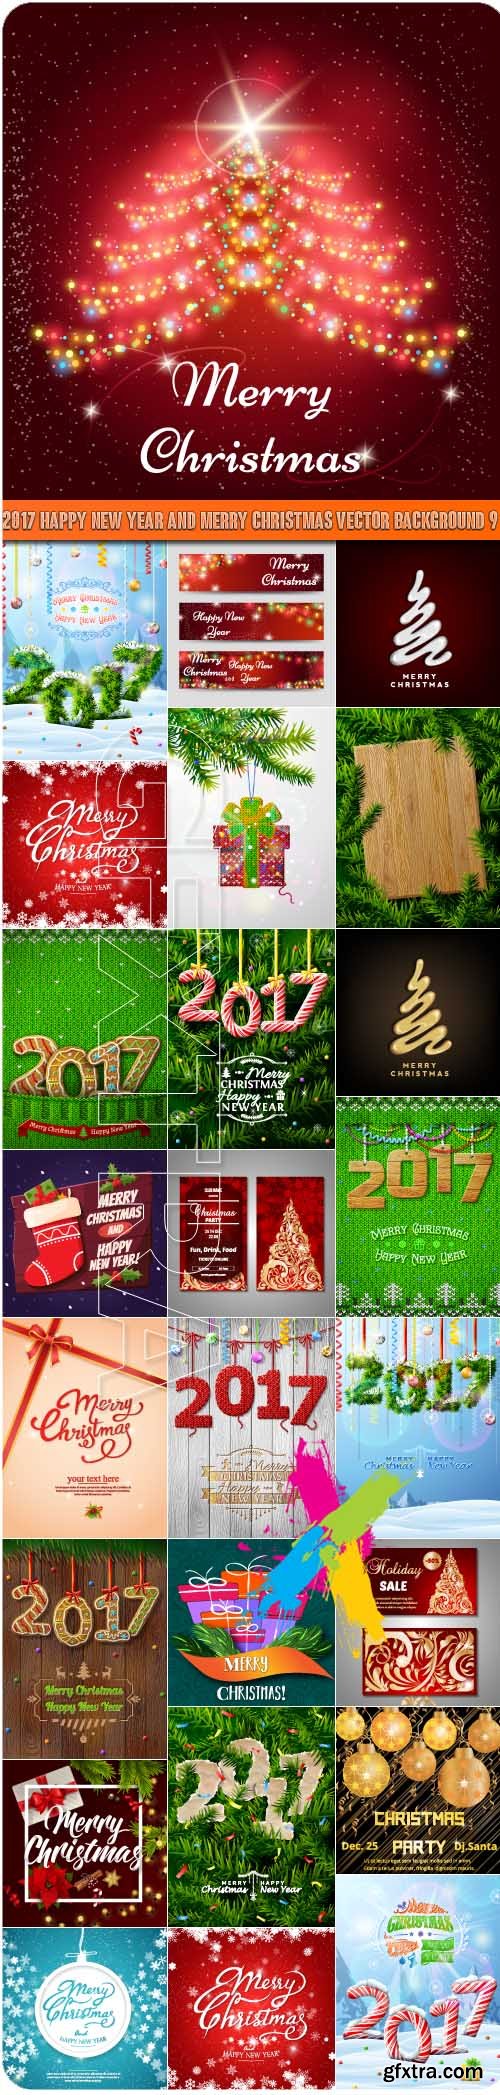 2017 Happy New Year and Merry Christmas vector background 9